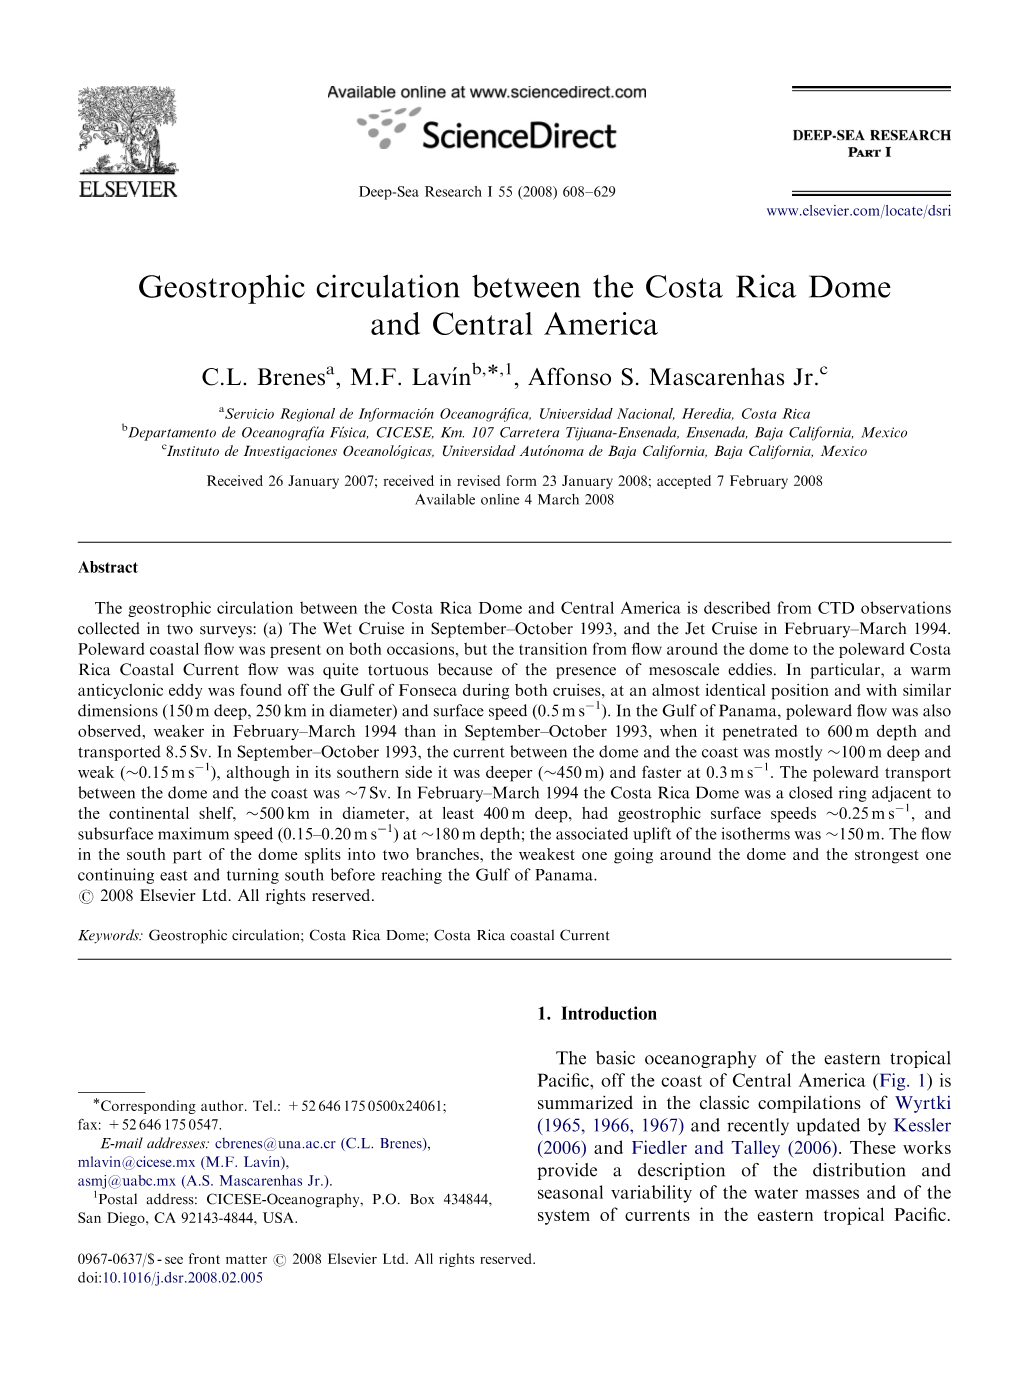 Geostrophic Circulation Between the Costa Rica Dome and Central America